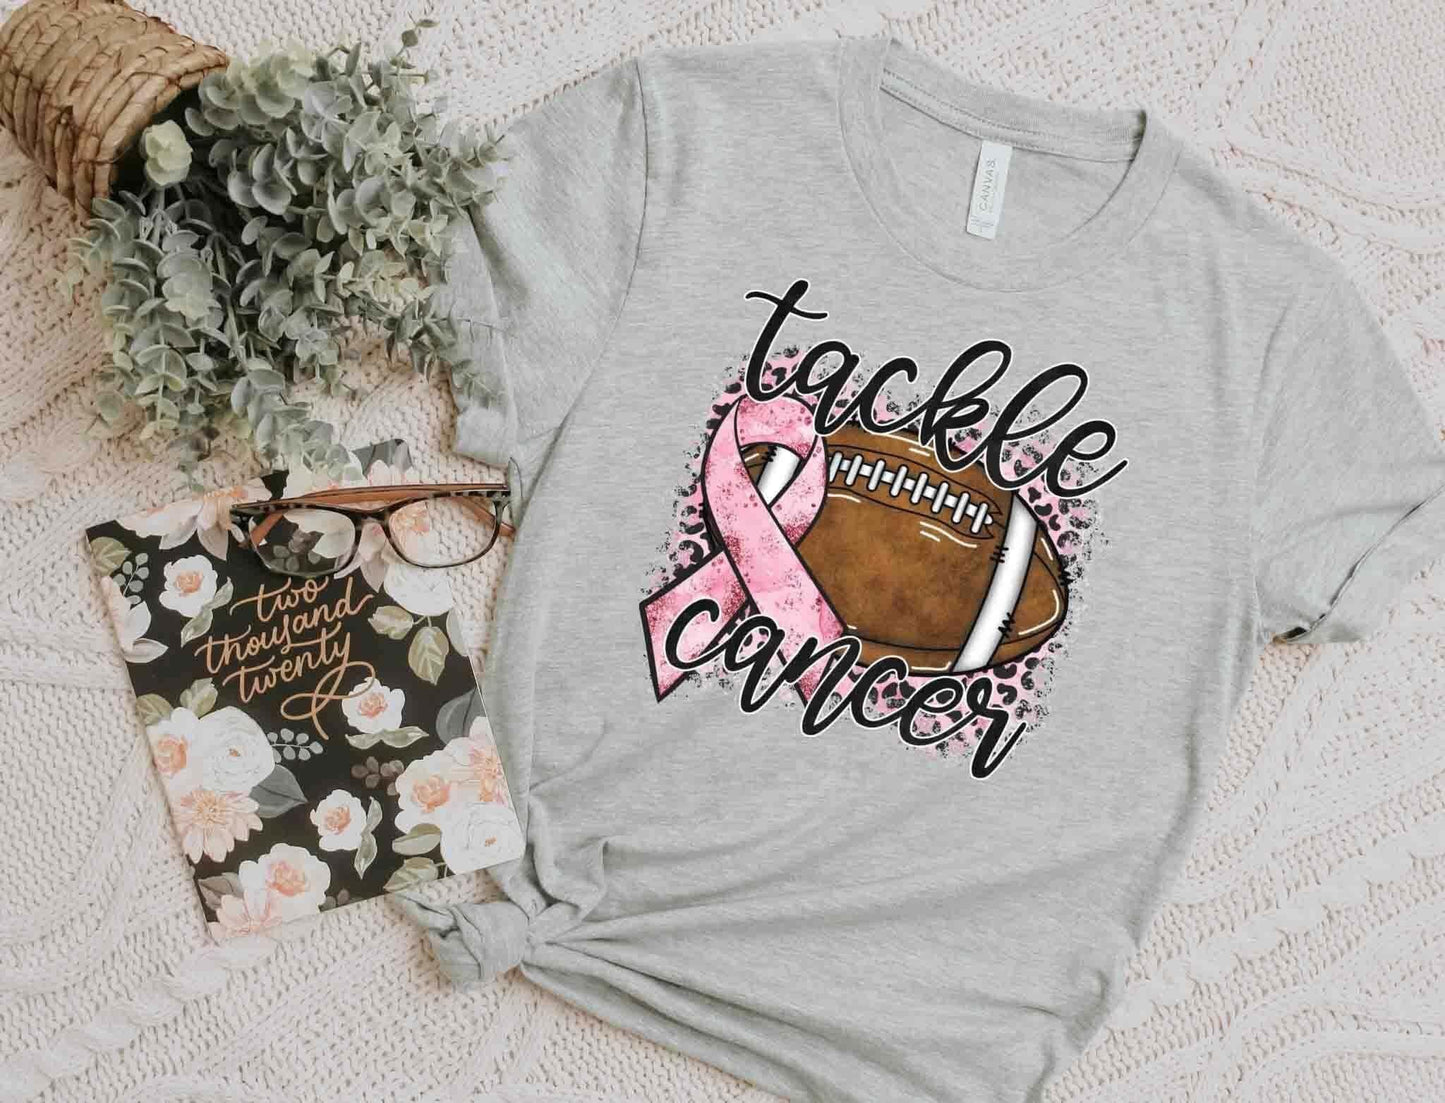 PREORDER - Tackle Cancer Soft Boutique Tee